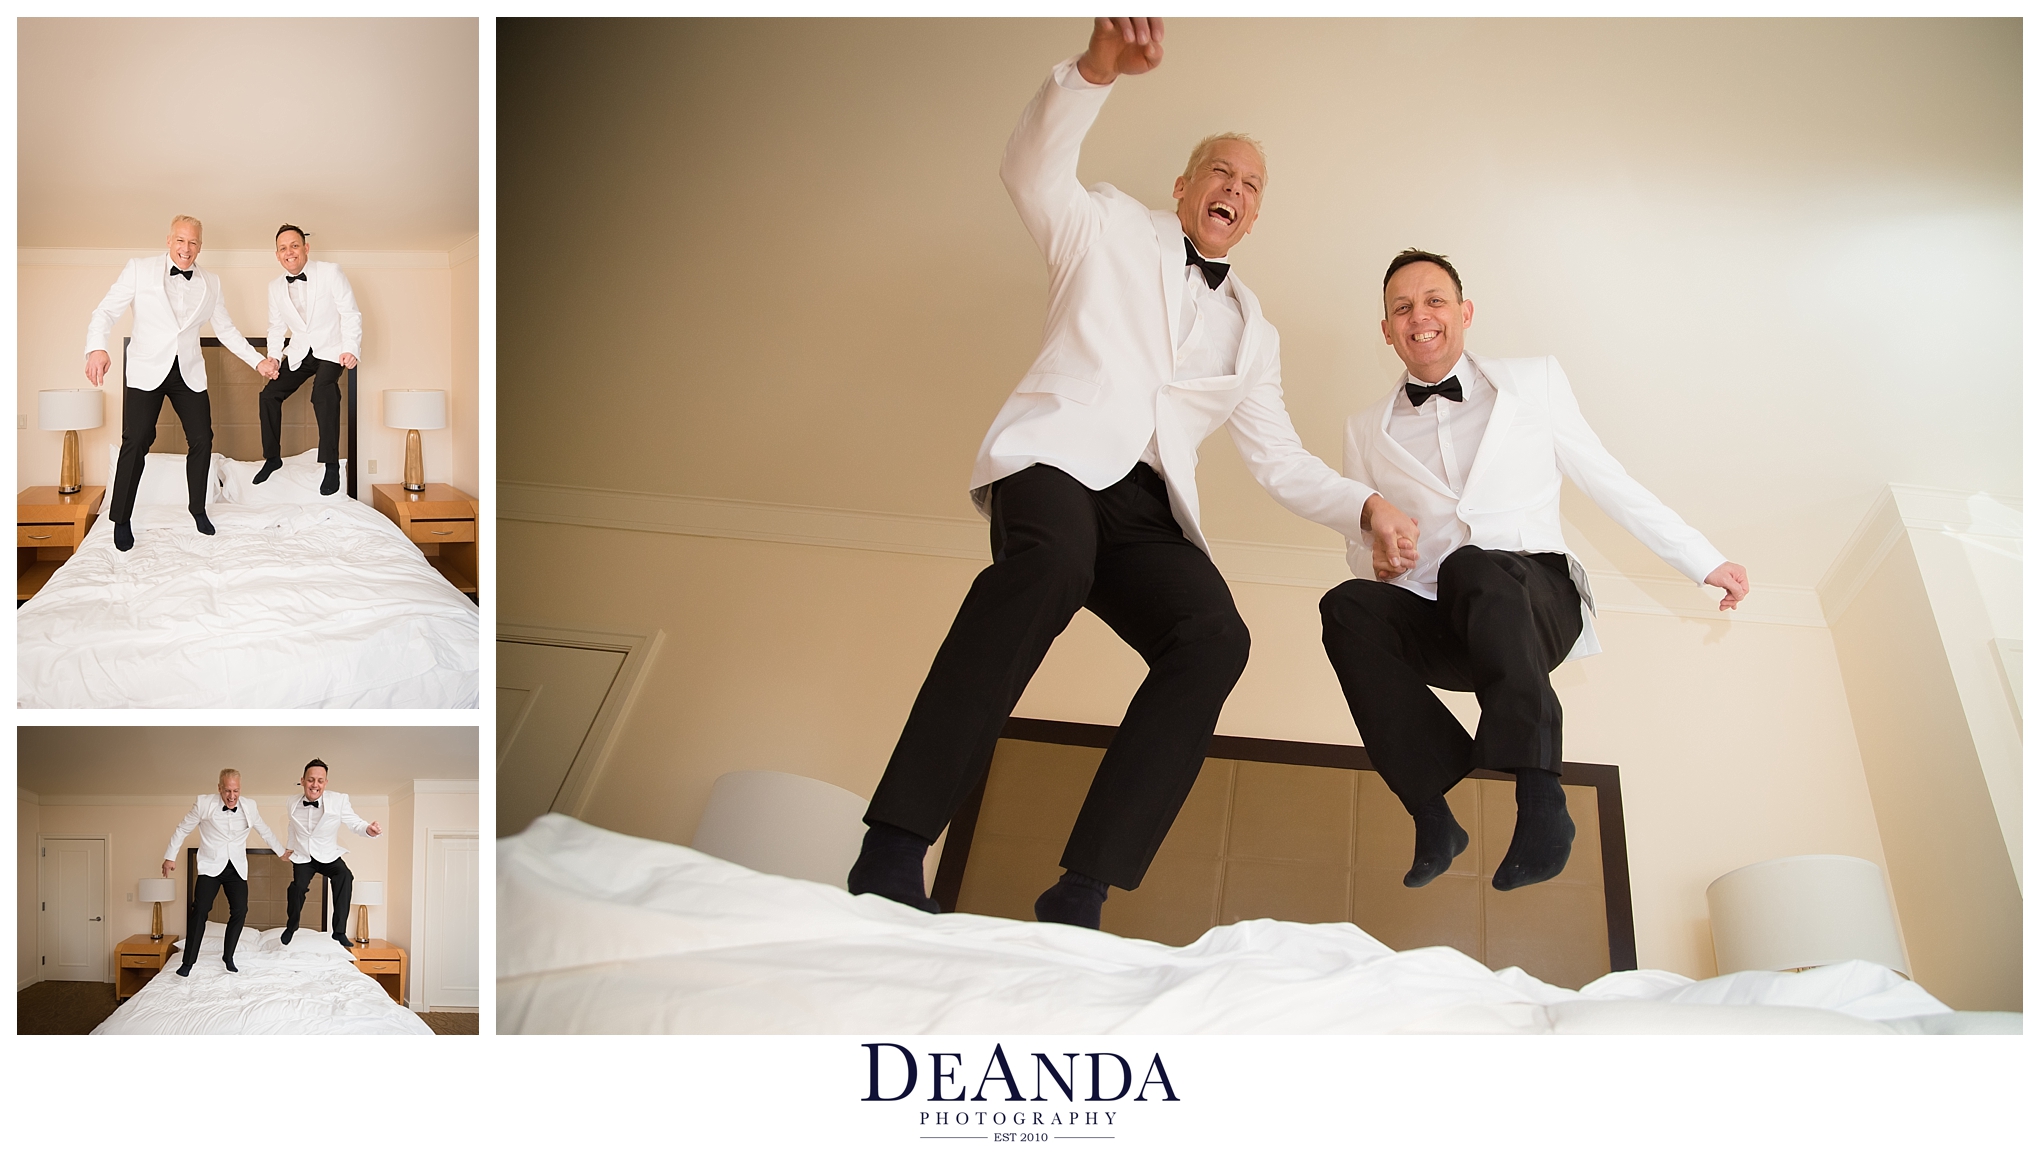 fun photo of gay couple married jumping on bed